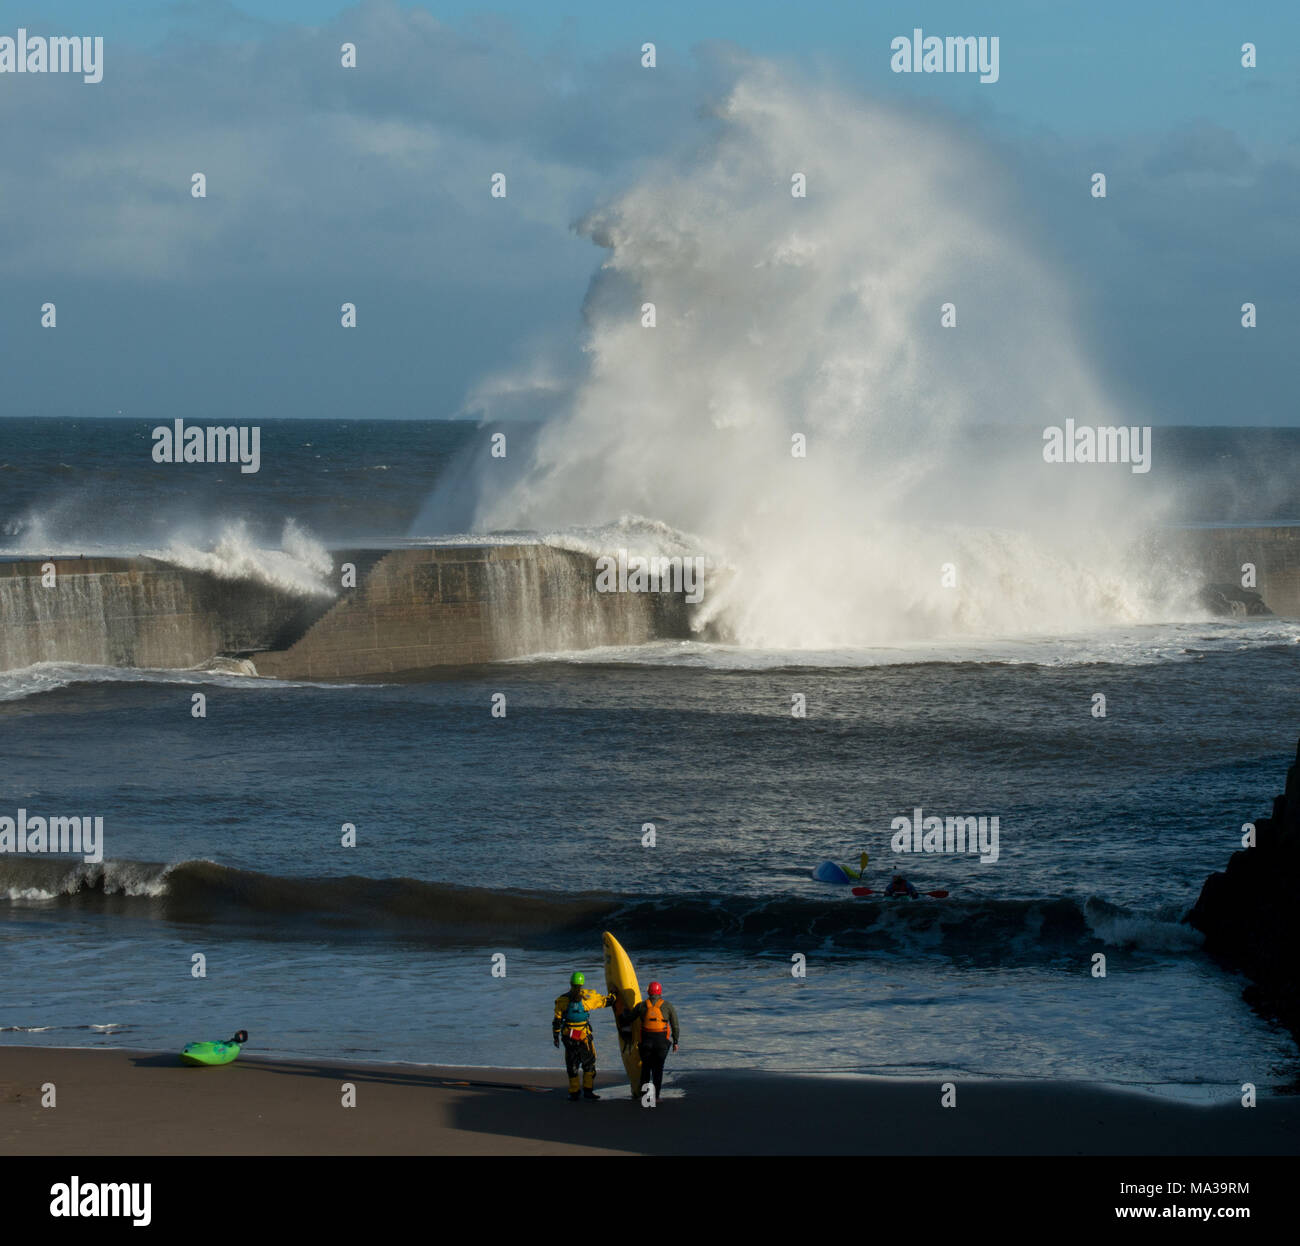 kayak enthusiasts at Seaham Harbour view the mountainous waves crashing over the pier Stock Photo